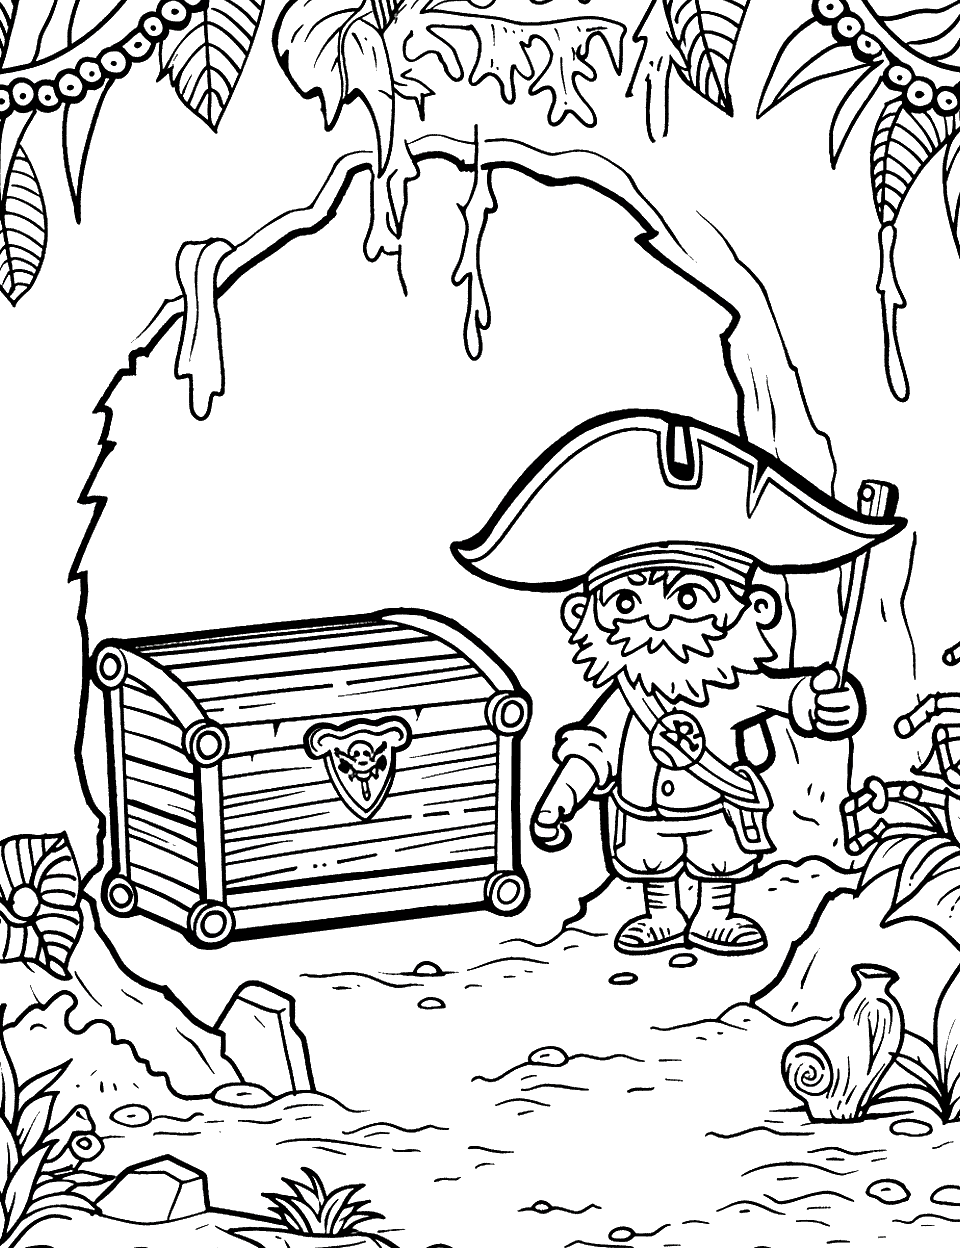 Hidden Pirate Treasure Coloring Page - A pirate finding a small hidden cave with a chest of treasure inside.